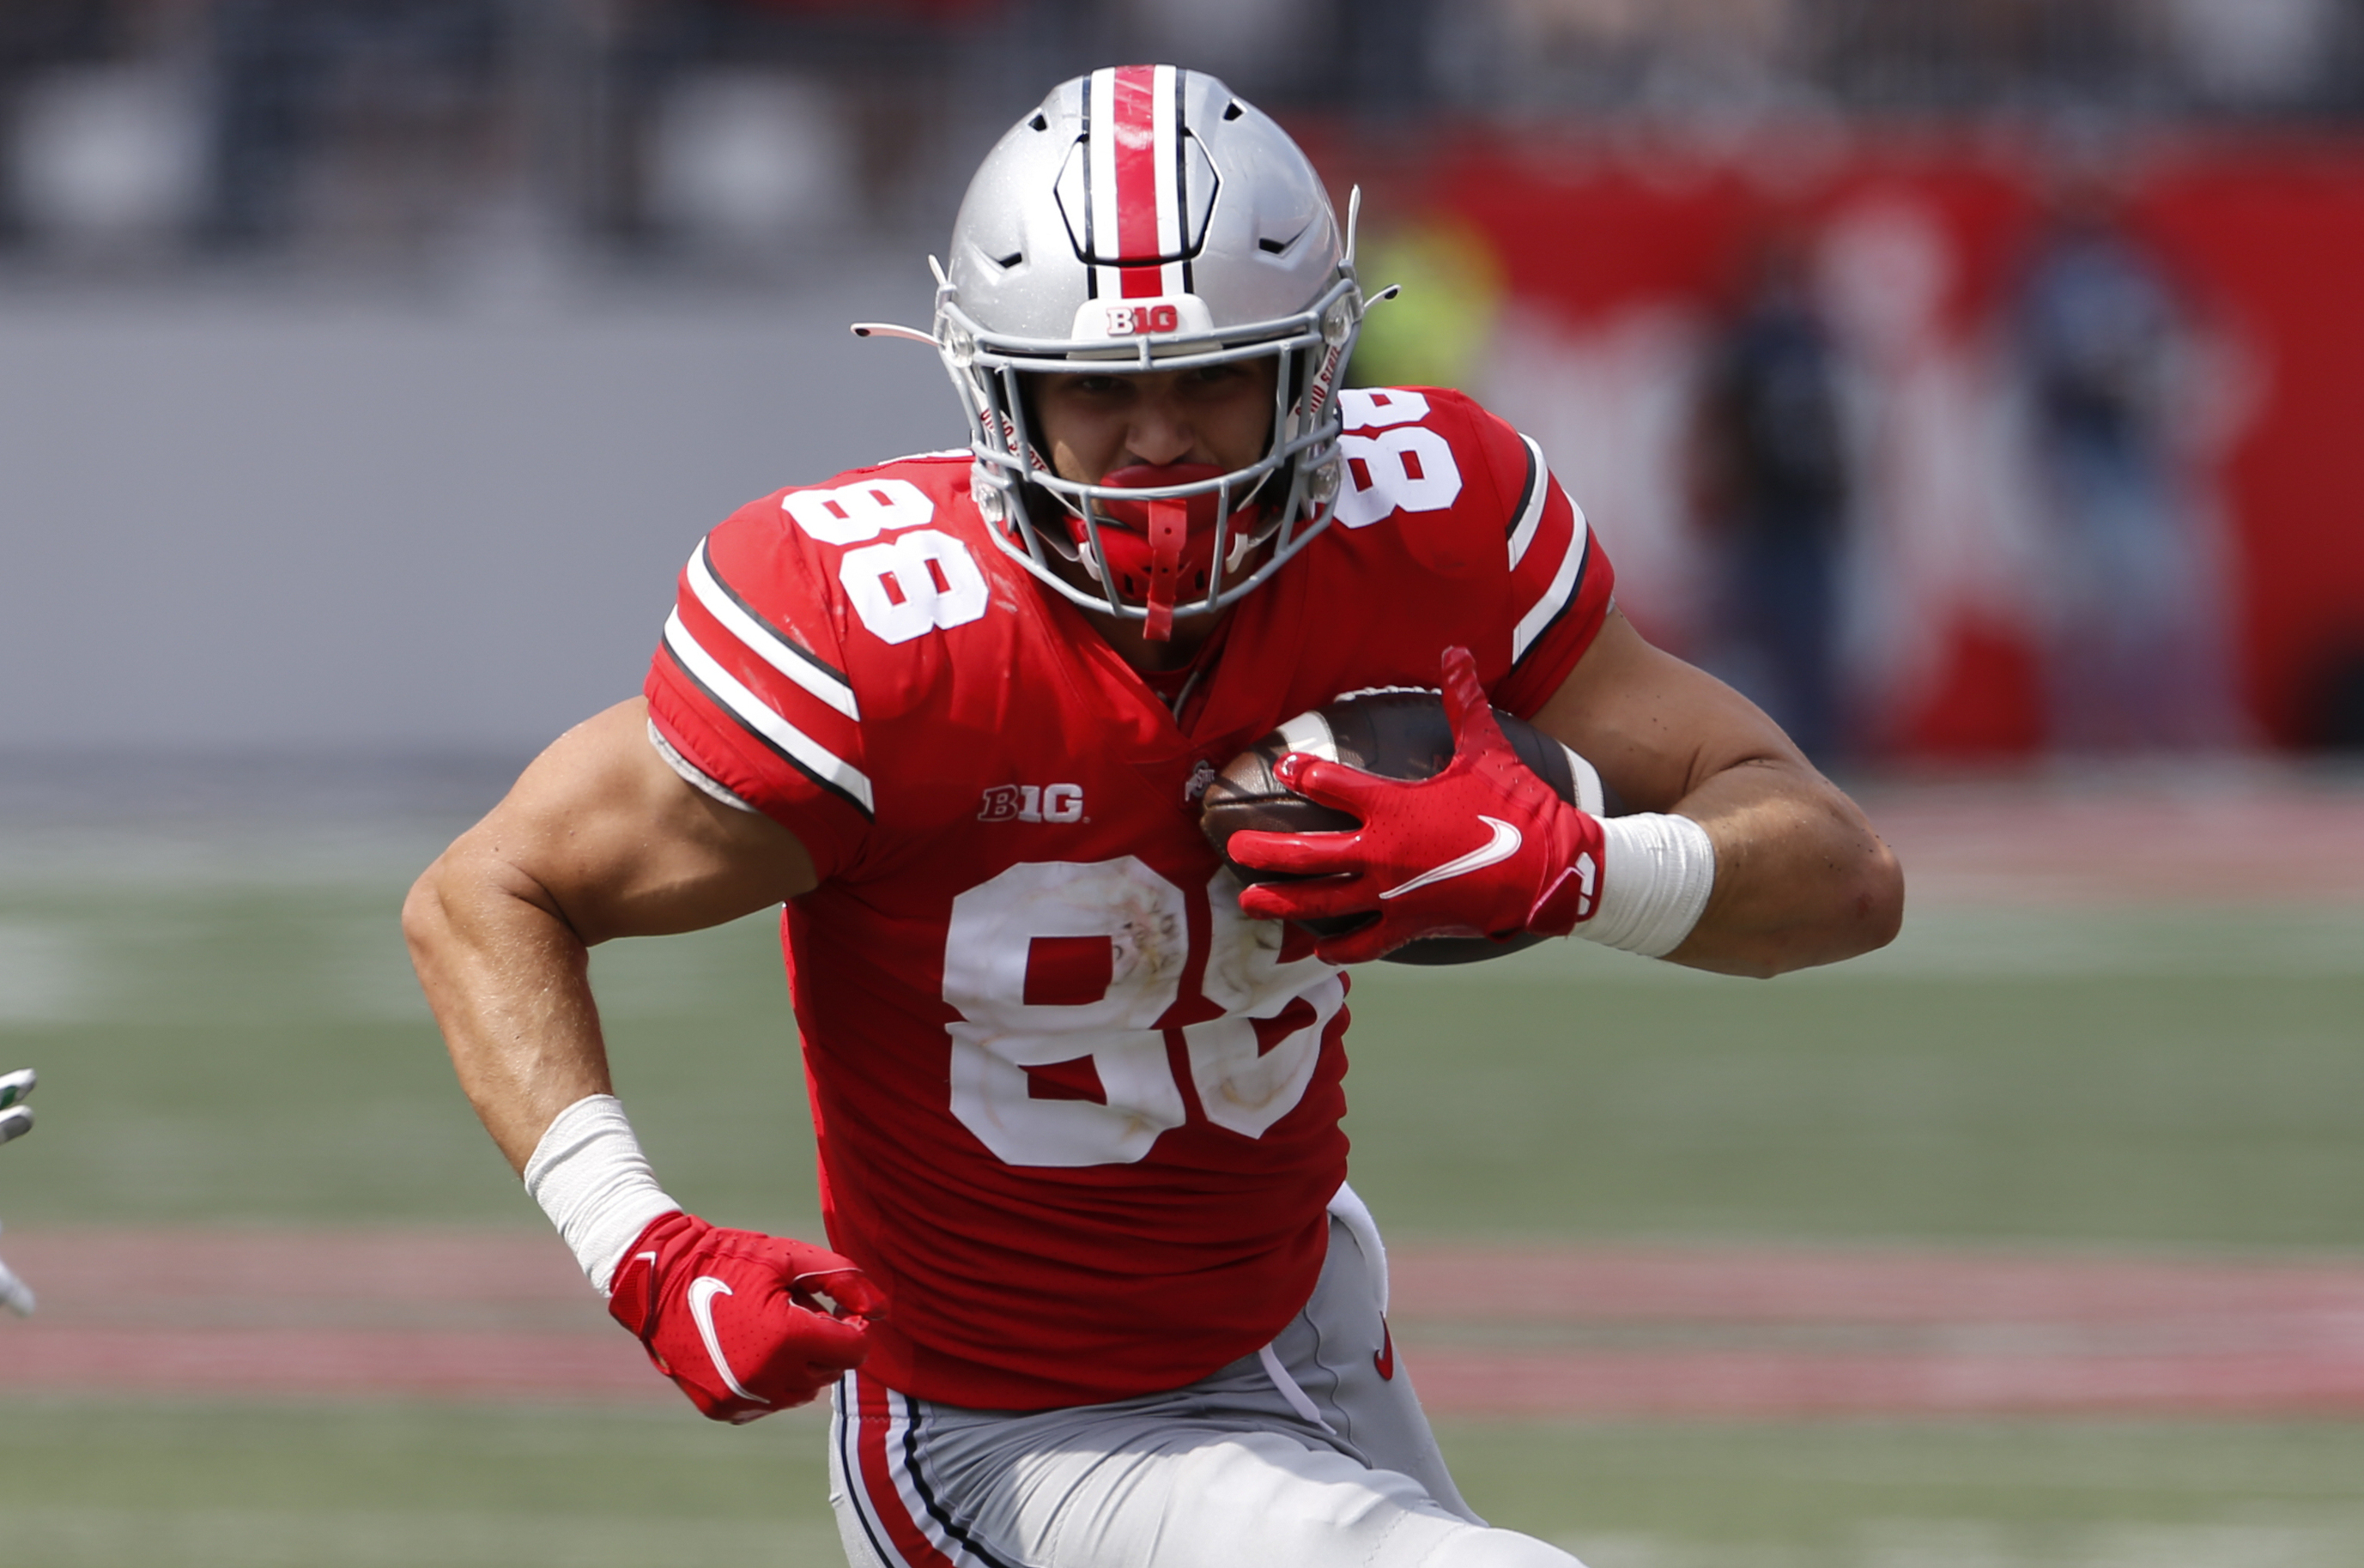 Mike Band on X: My final 2022 NFL Draft Cheat Sheet is live! Here is a  look at what each team's first-round big board might look like based on pre- draft reports, team